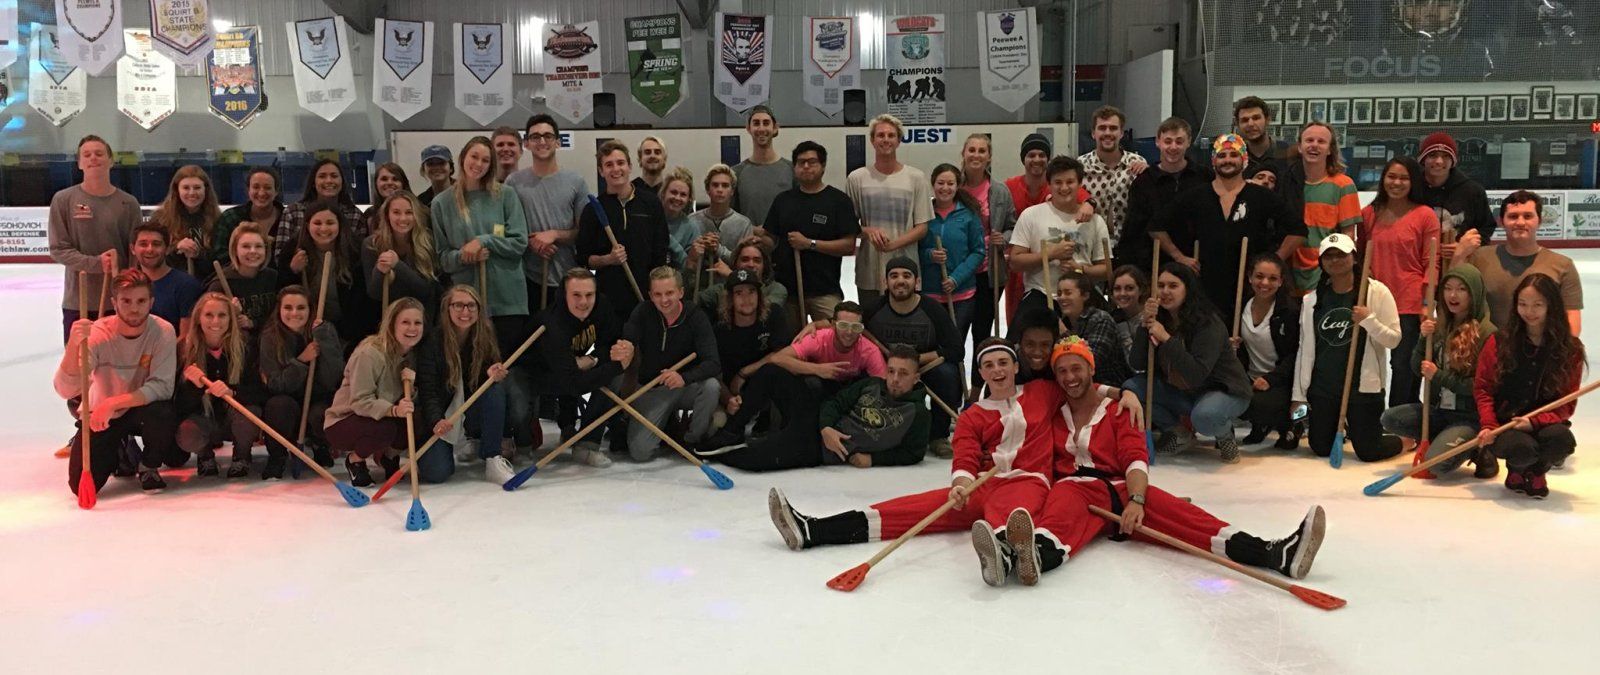 A large group of PLNU transfer students play broomball at a TAG event